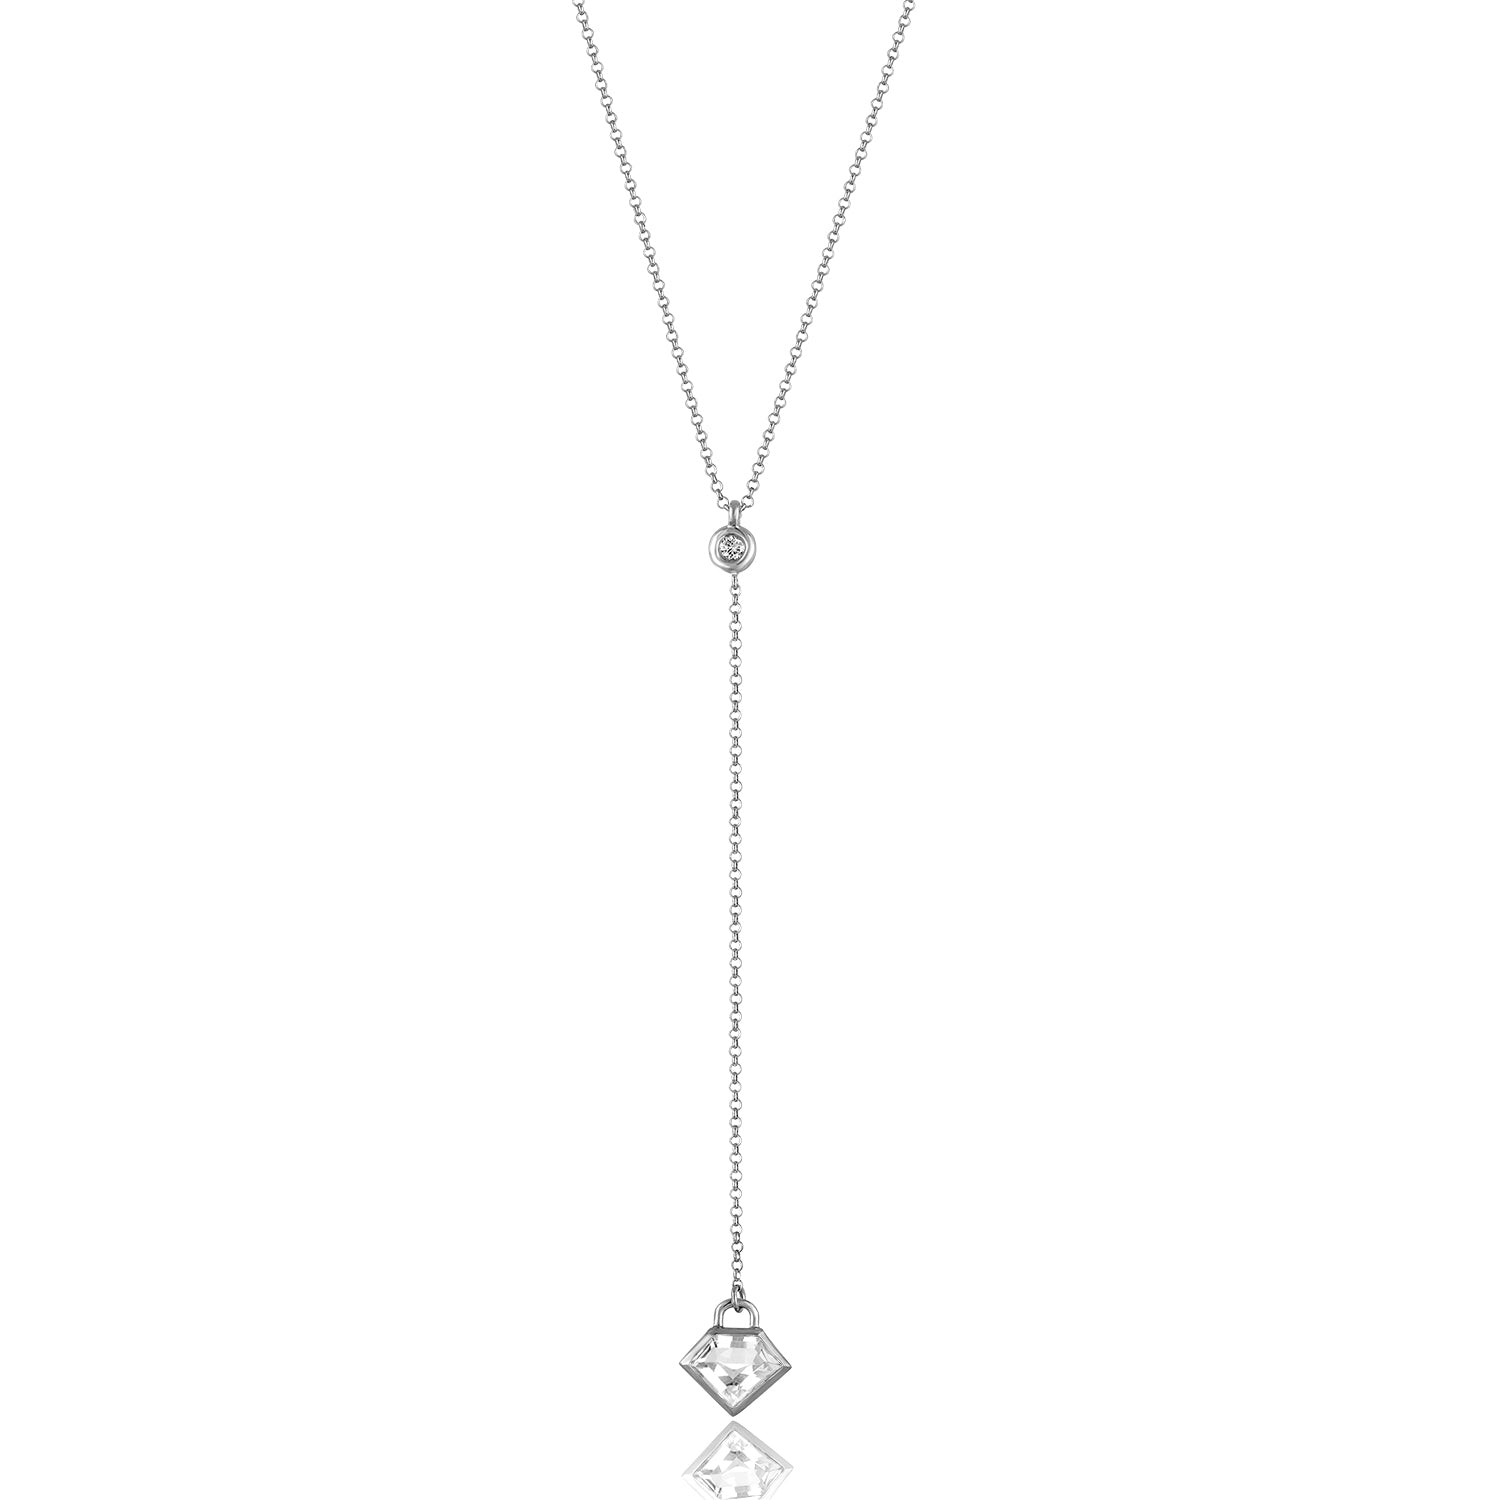 Sterling Silver Lariat Necklace with Diamond and Gemstone - Julie Lamb